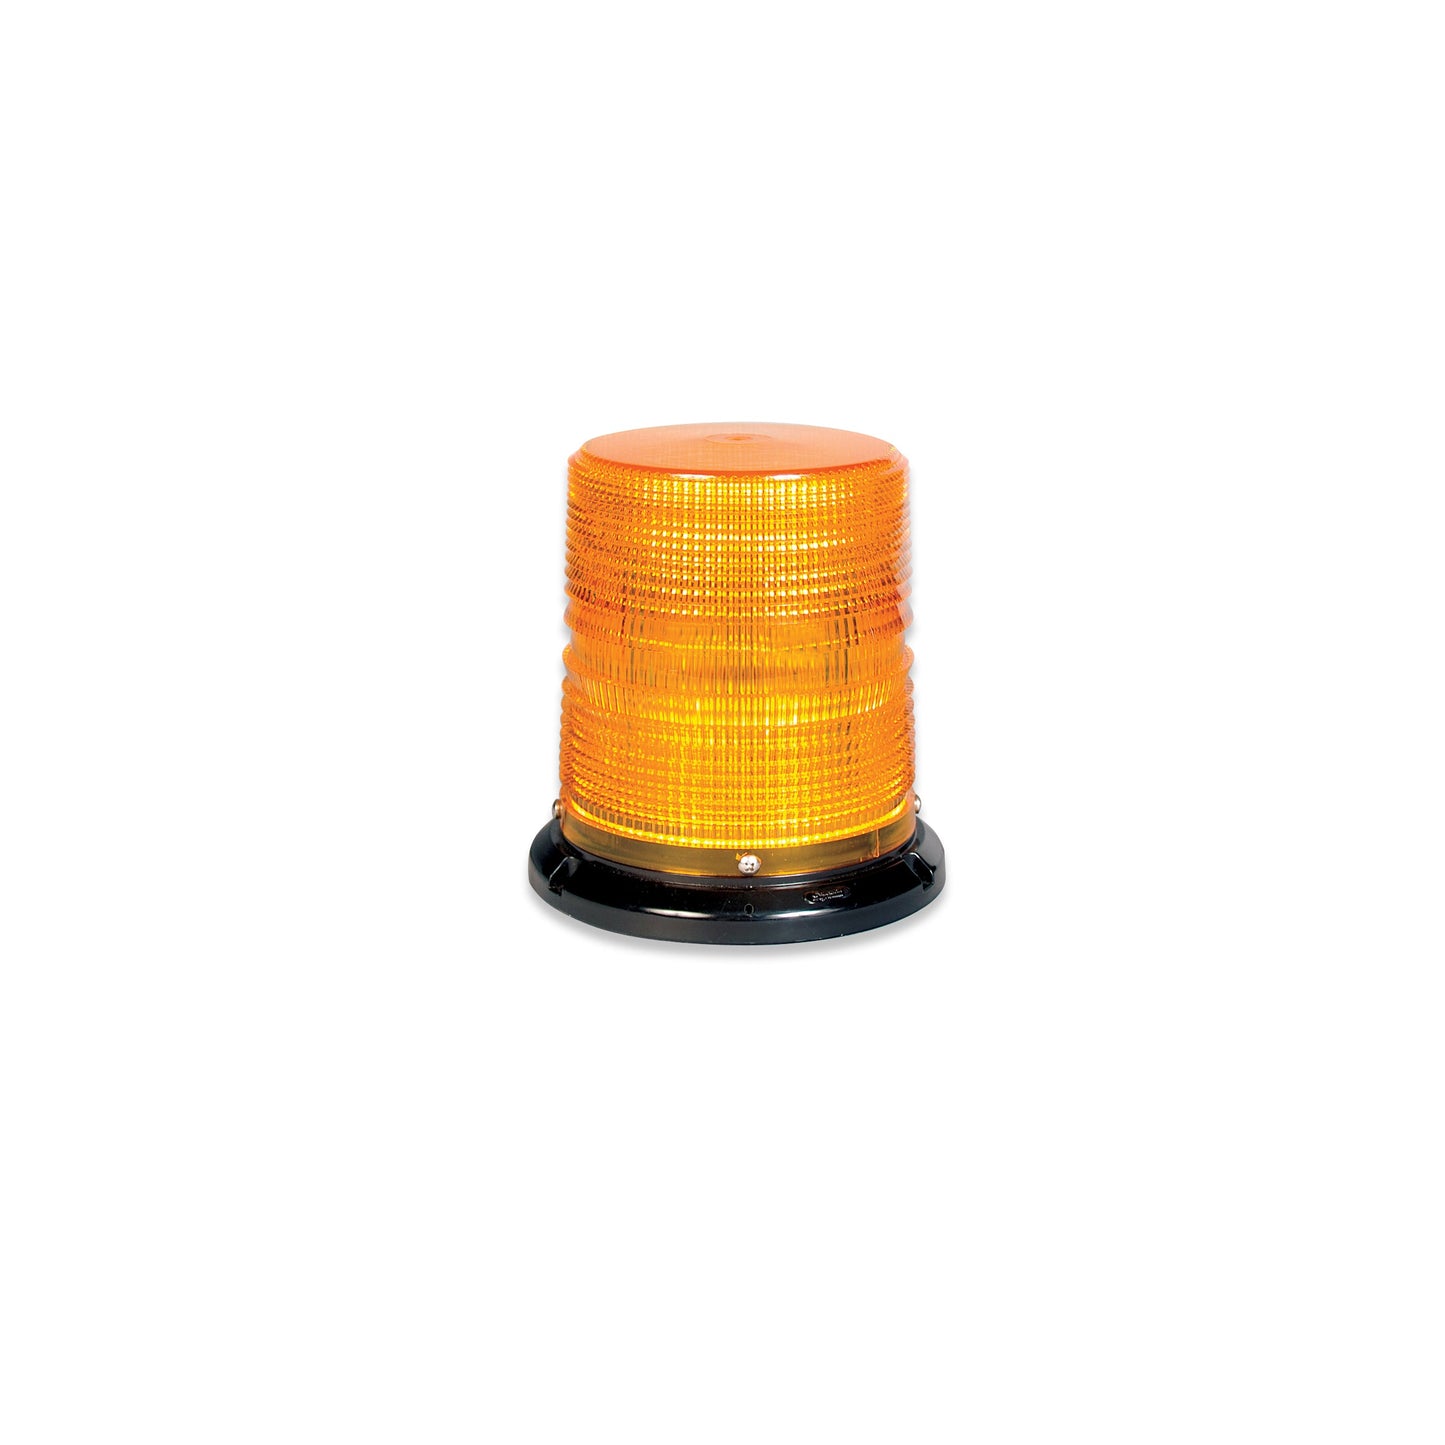 Soundoff Signal ELB45BML+BC 4500 Series Led Beacon, 10-30V, Sae J845 Class 1 - Magnetic Mount, 4" Clear Dome/ Blue Leds